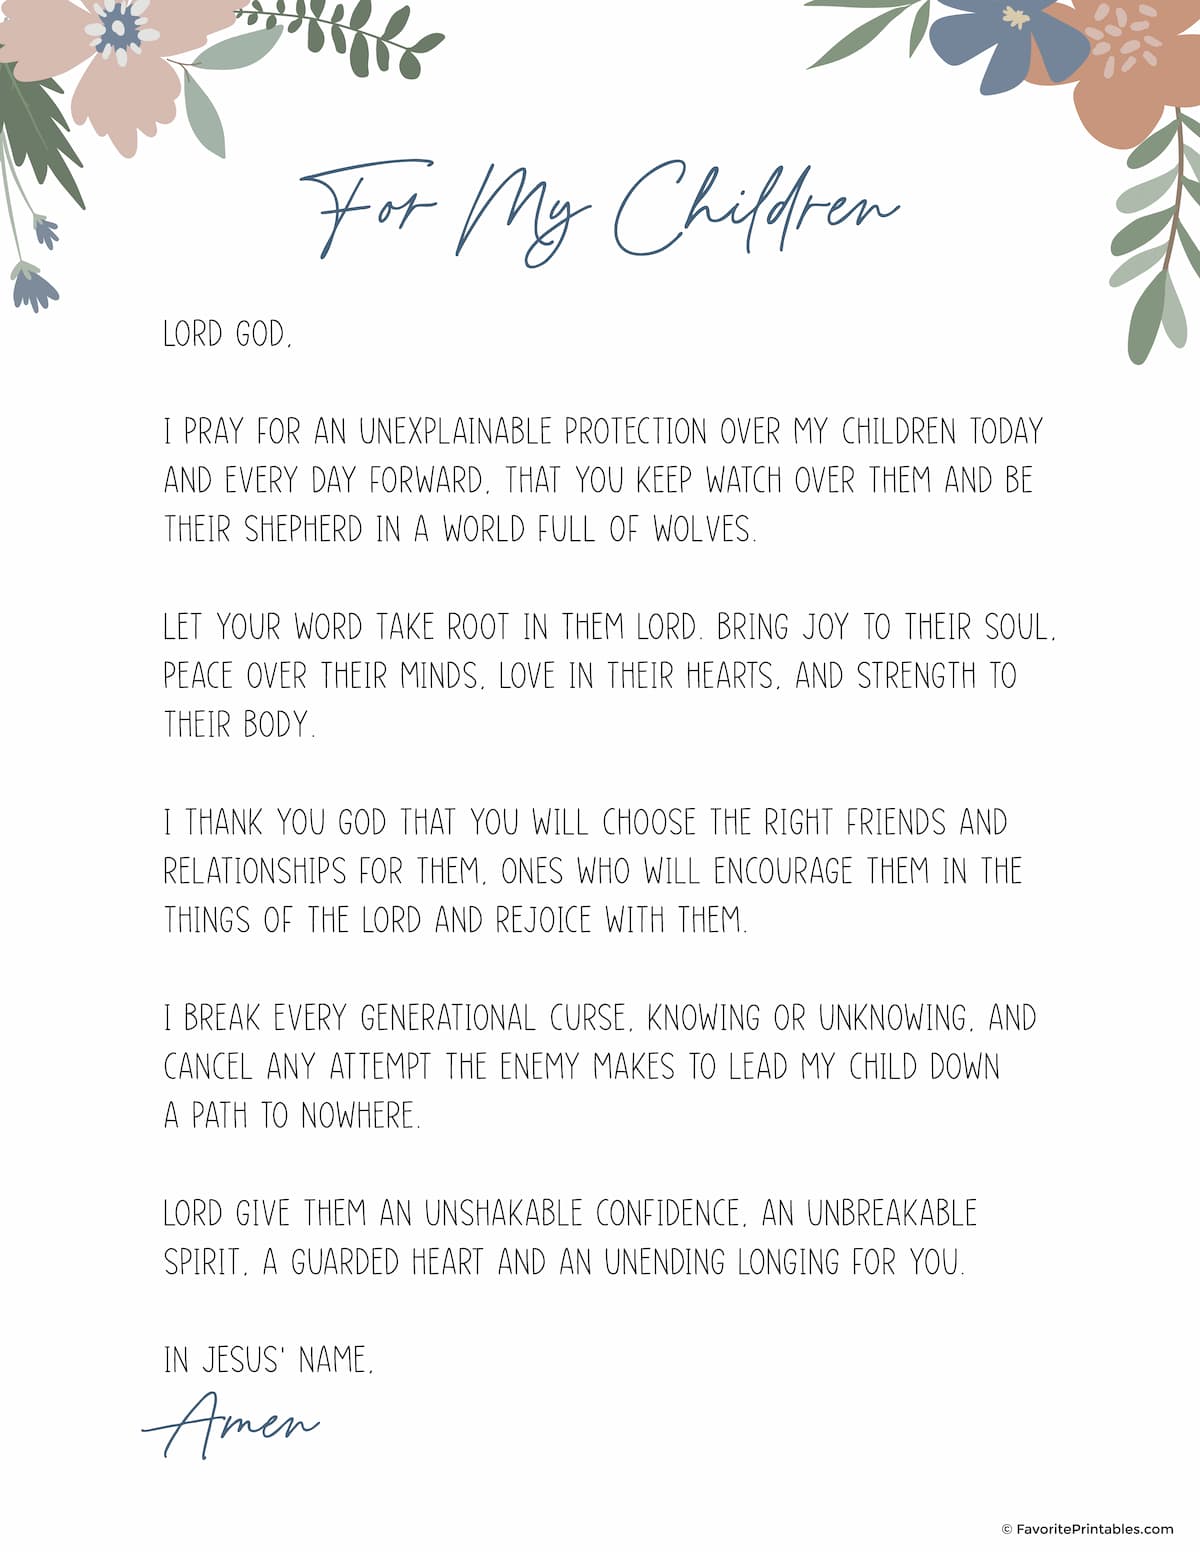 A Prayer For My Children printable preview.